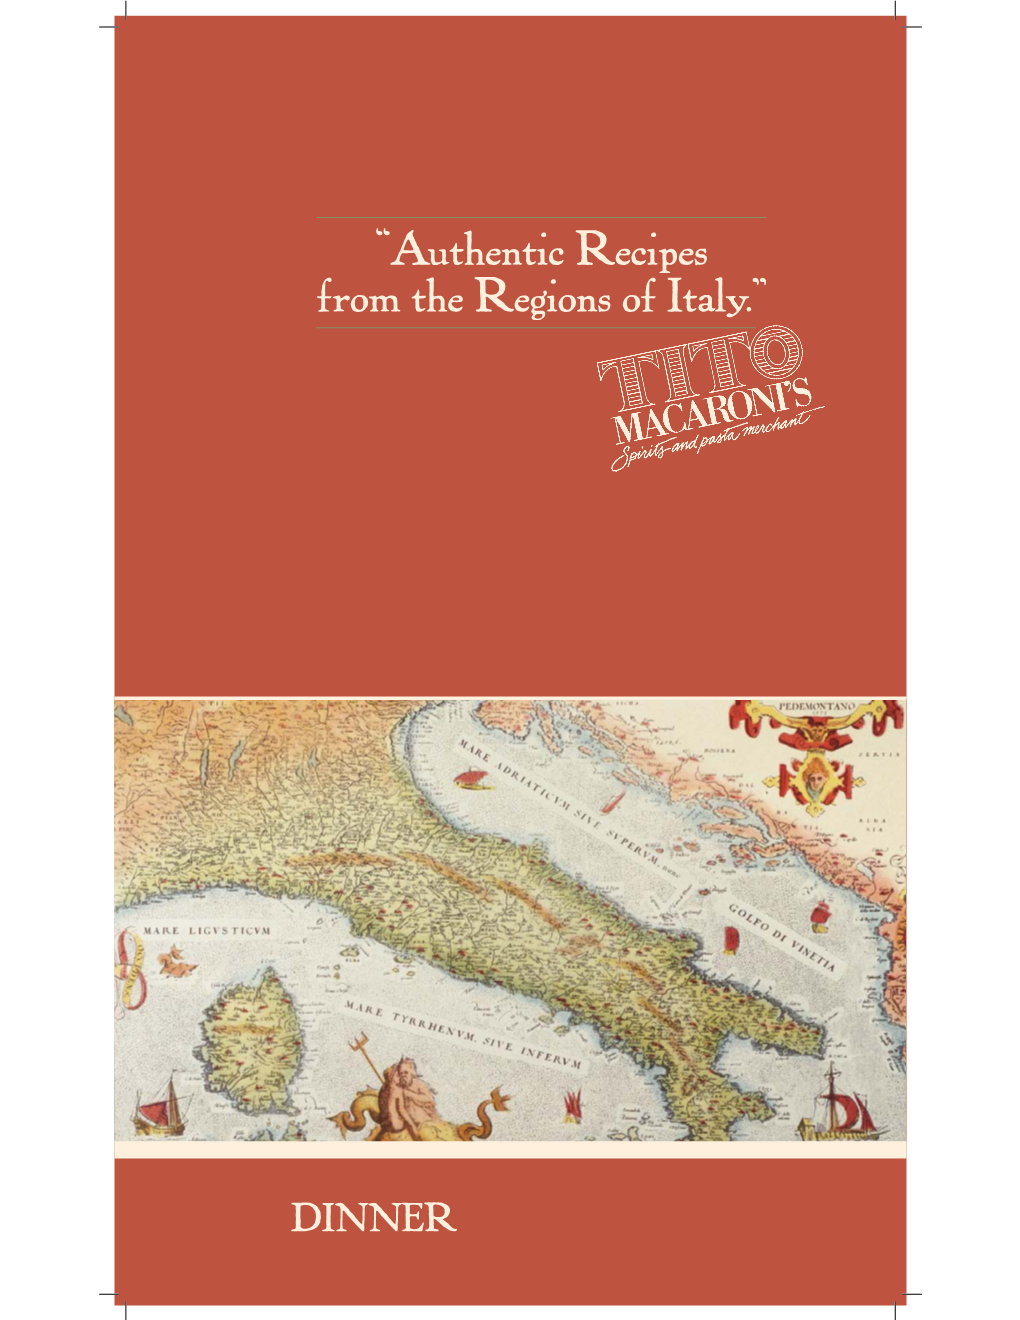 “Authentic Recipes from the Regions of Italy.”